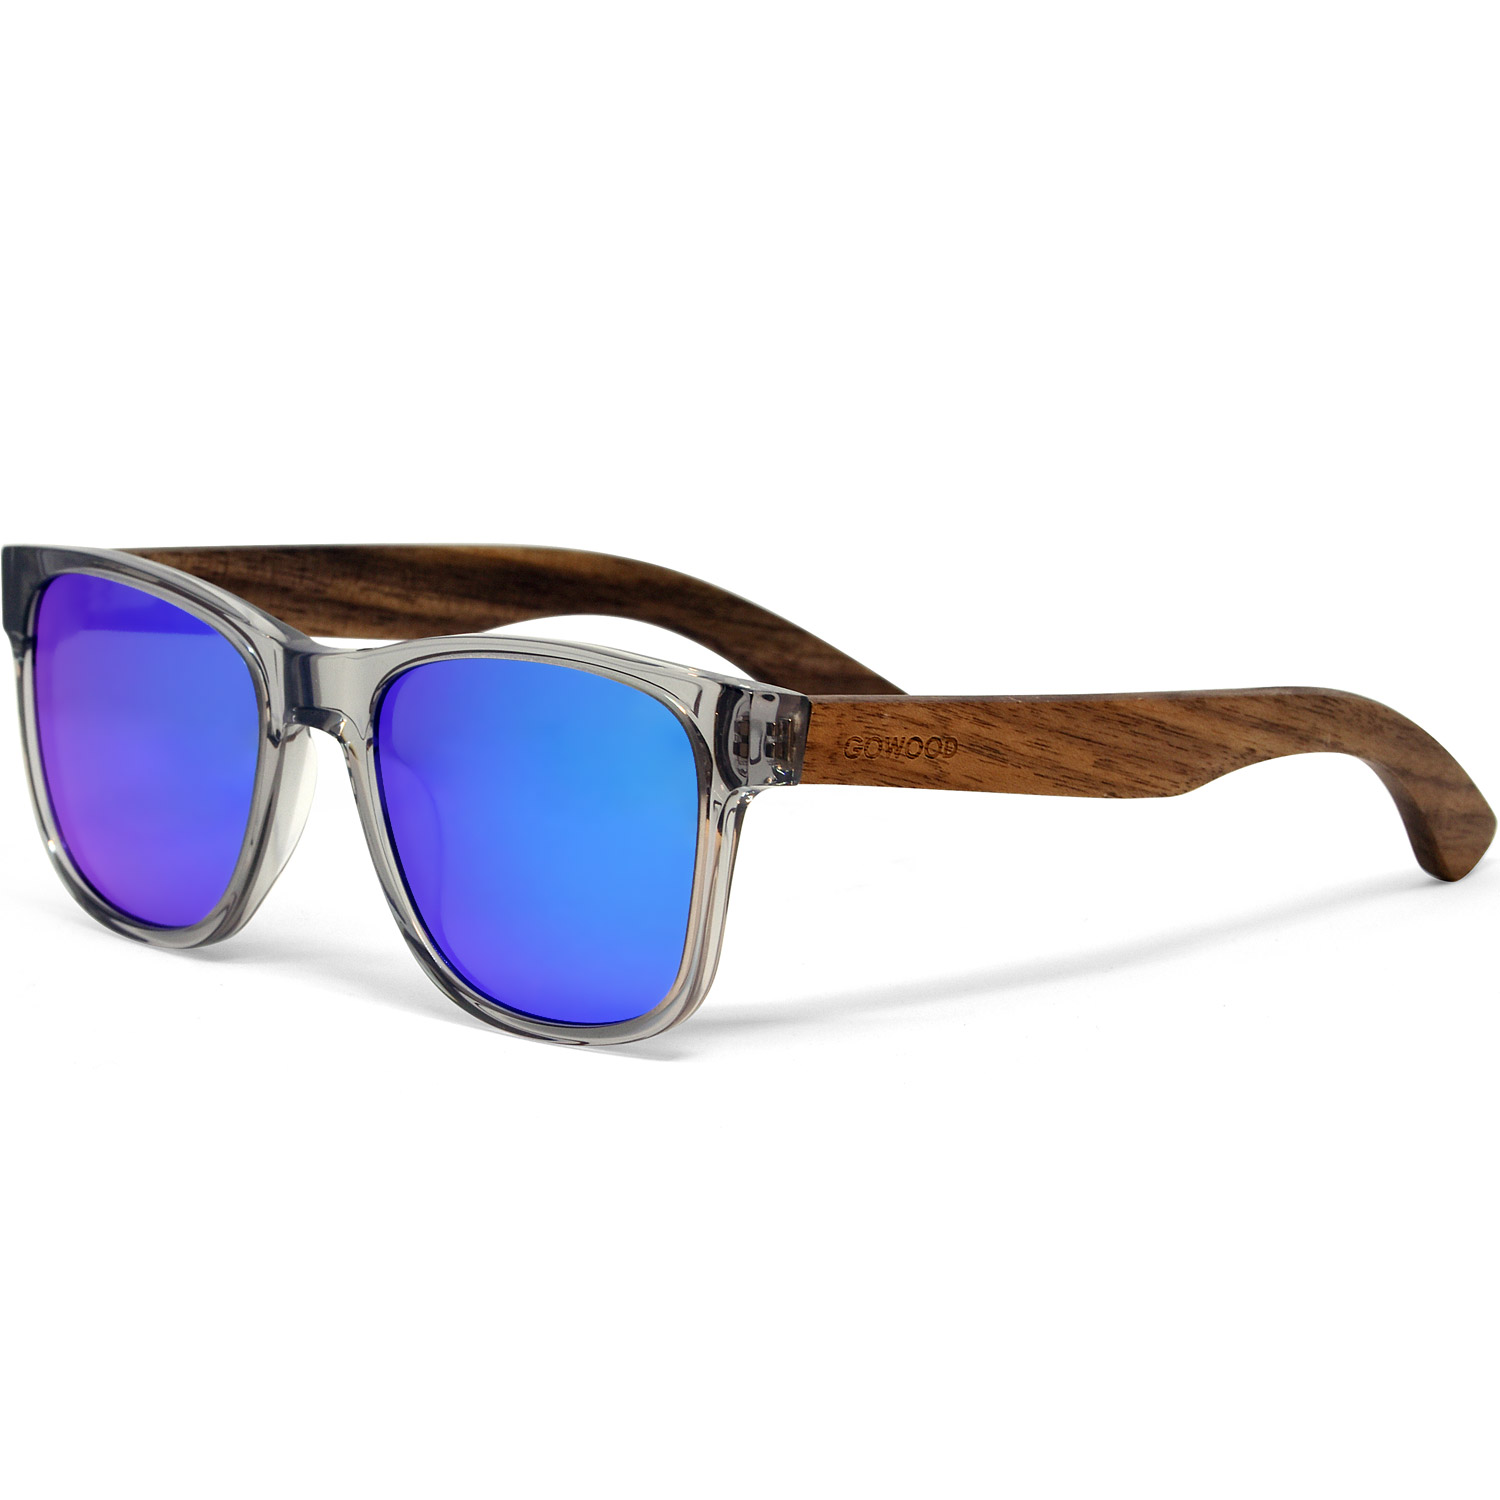 Walnut wood sunglasses classic style transparent frame with blue lenses left